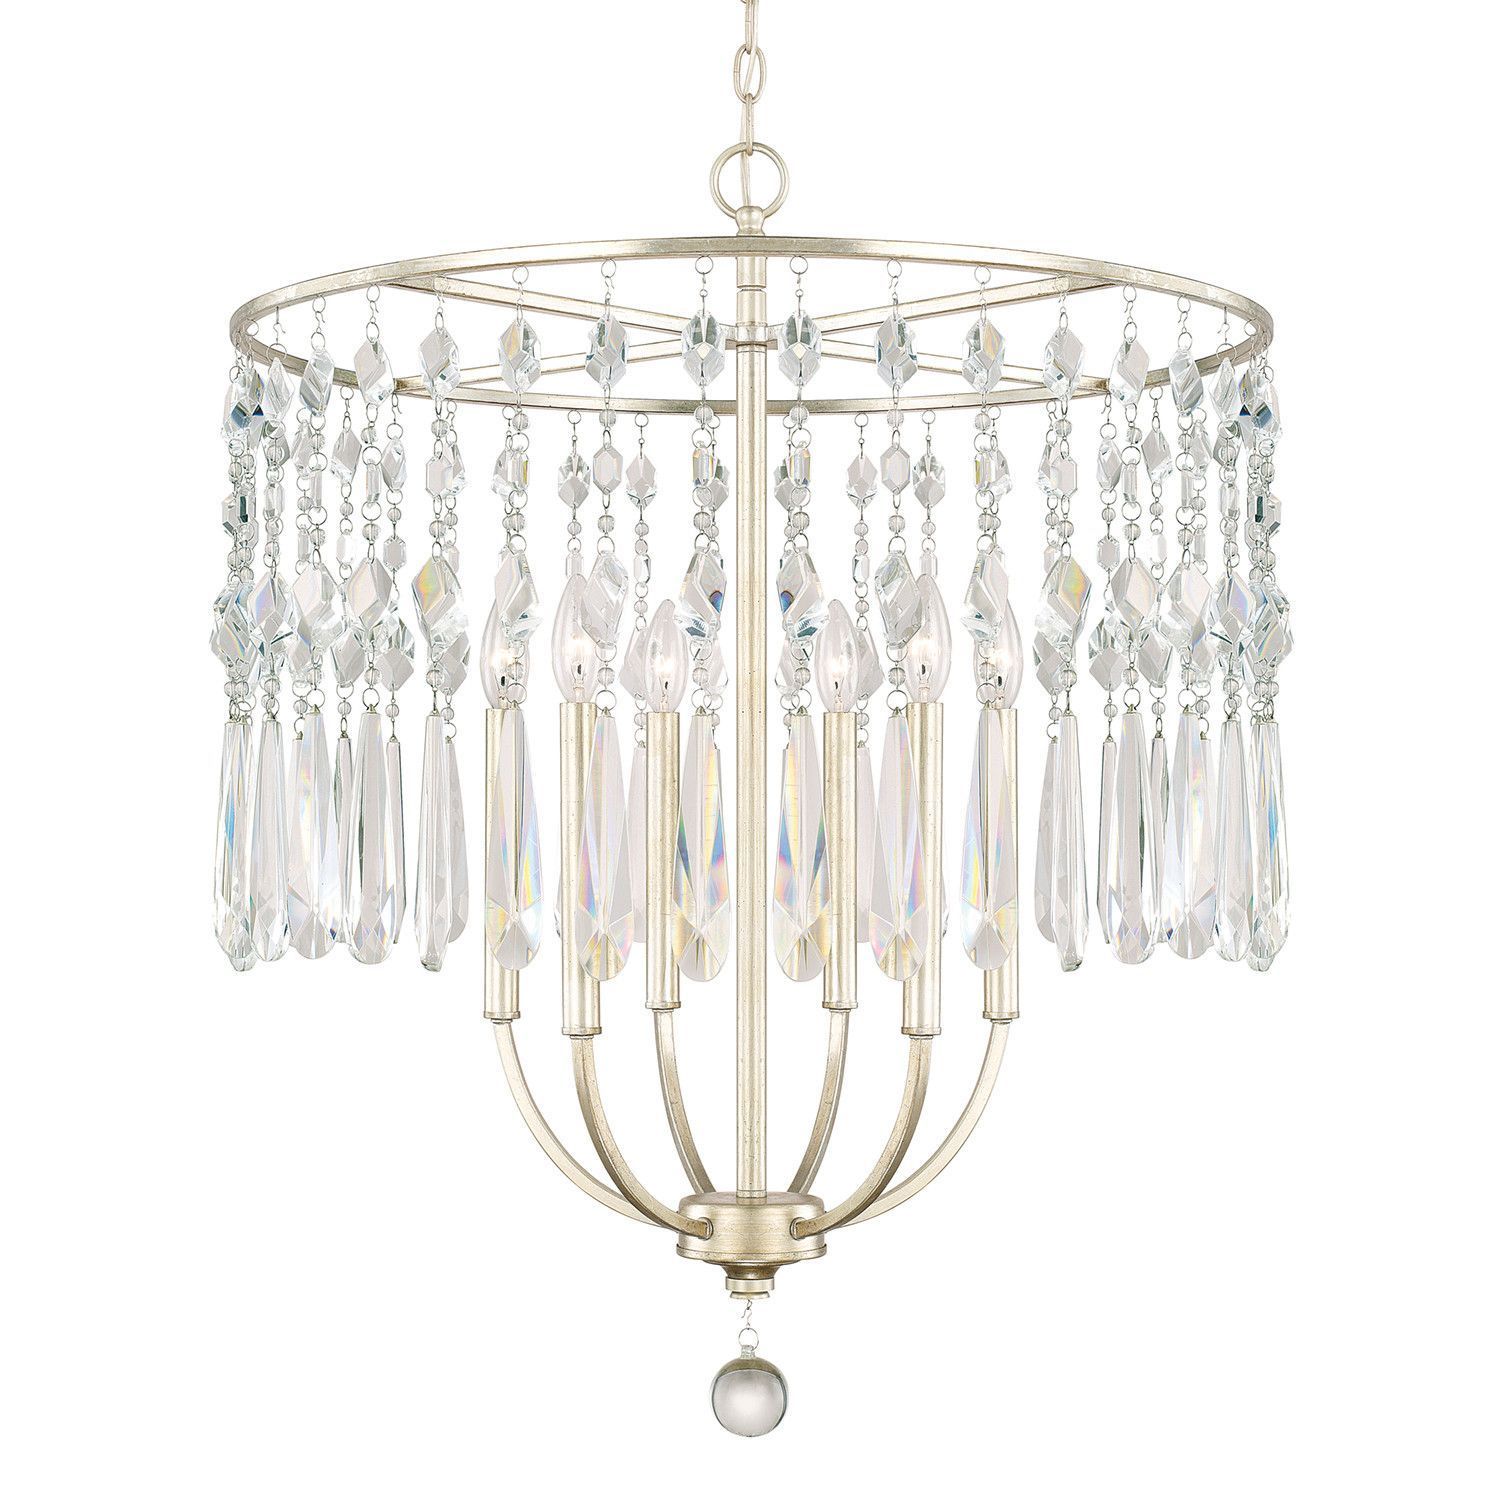 Nolan 6 Light Crystal Chandelier In 2019 | Products Intended For Nolan 1 Light Lantern Chandeliers (View 15 of 30)